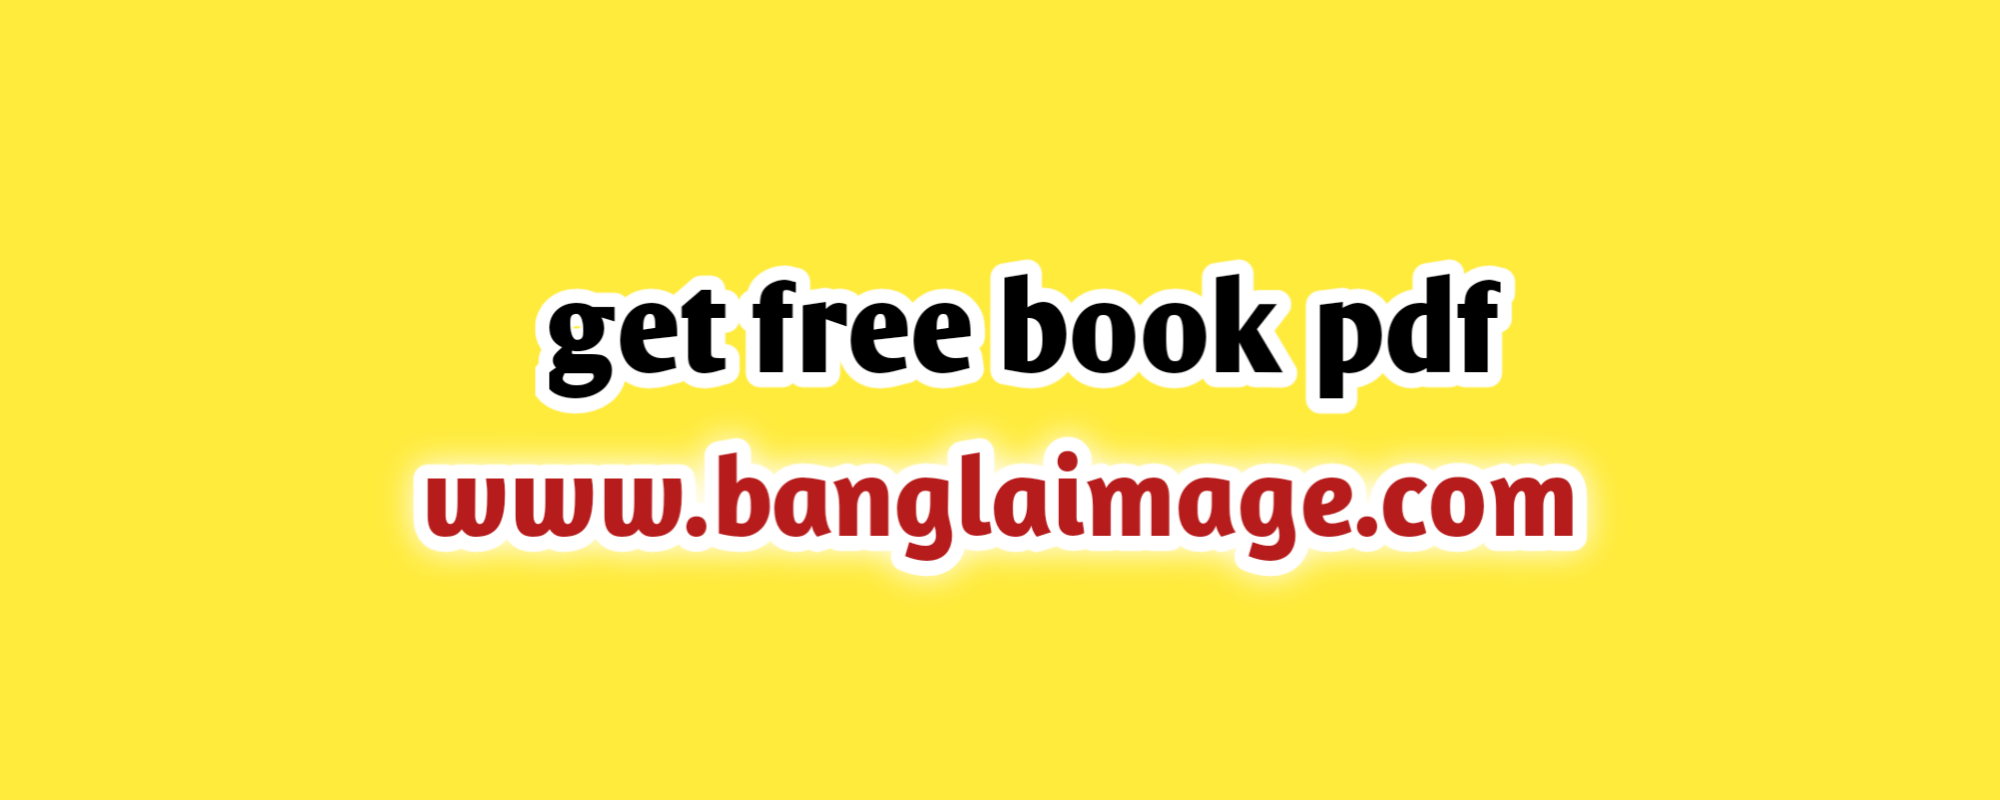 get free book pdf, get free book pdf download, mary scarf frankenstein book free, the get free book pdf download